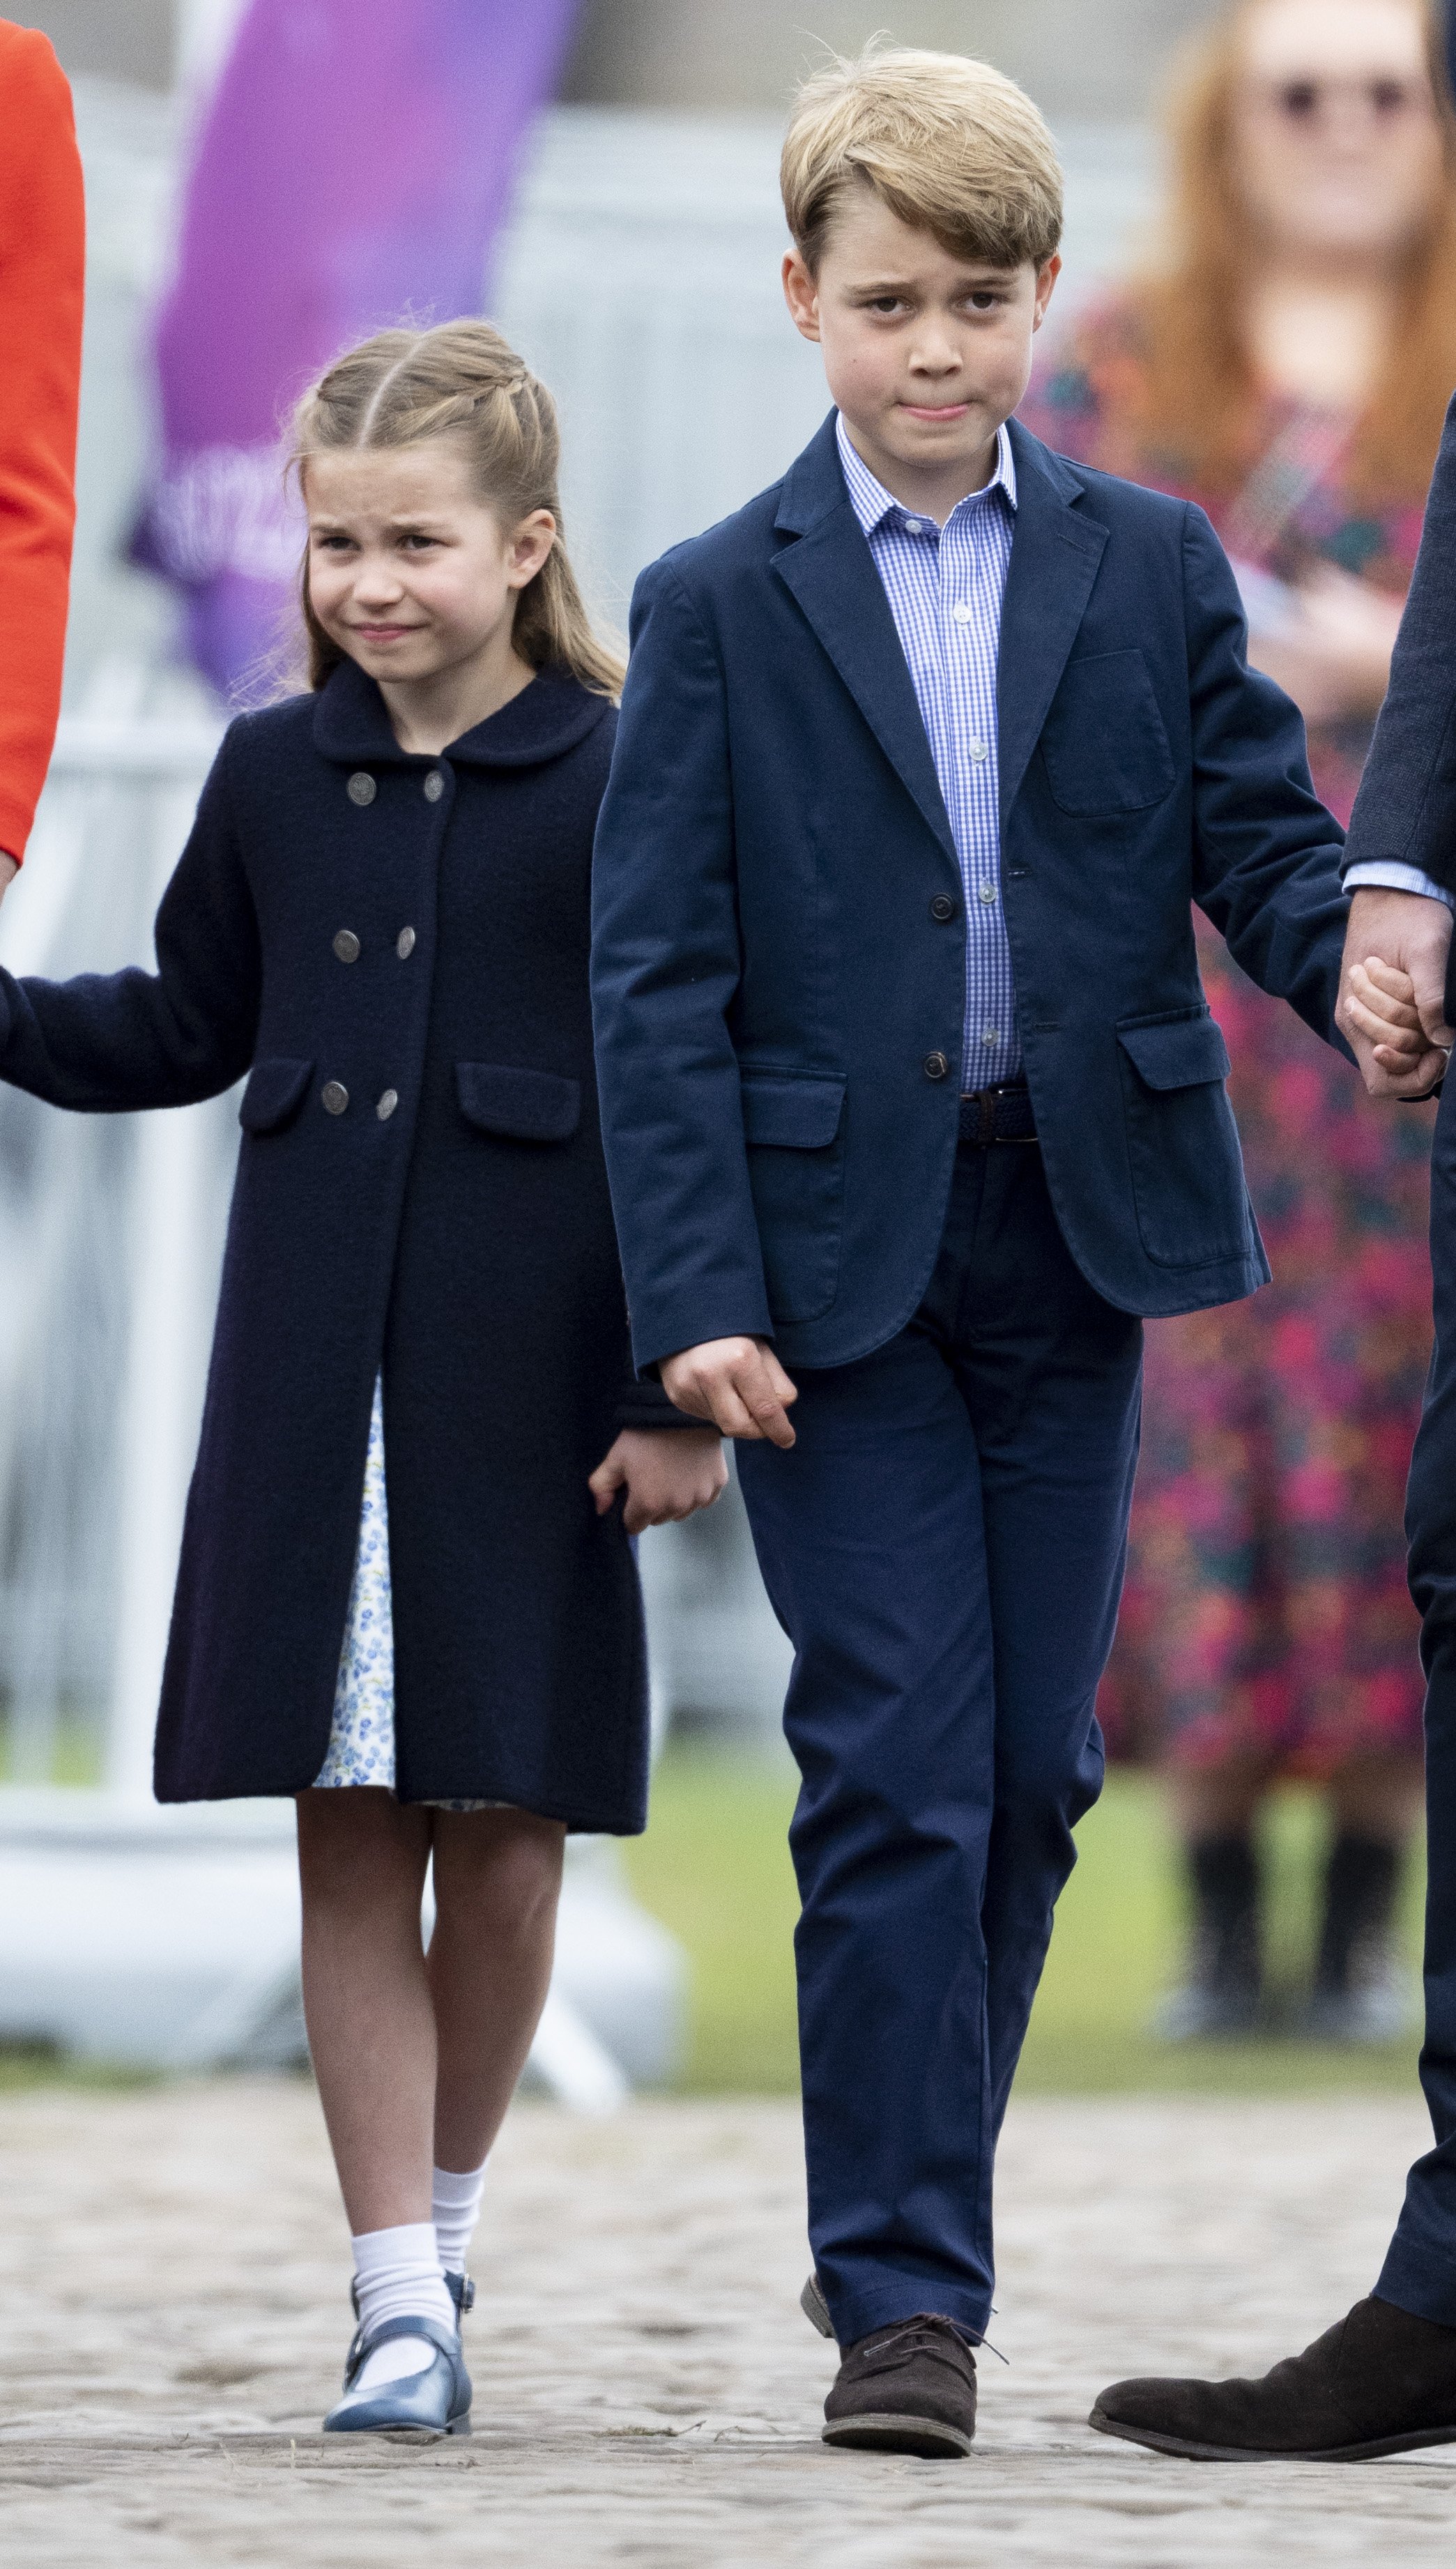 Princess Charlotte and Prince George meet performers and crew involved in the special Platinum Jubilee Celebration Concert taking place in the castle grounds on June 4, 2022 in Cardiff, United Kingdom | Source: Getty Images